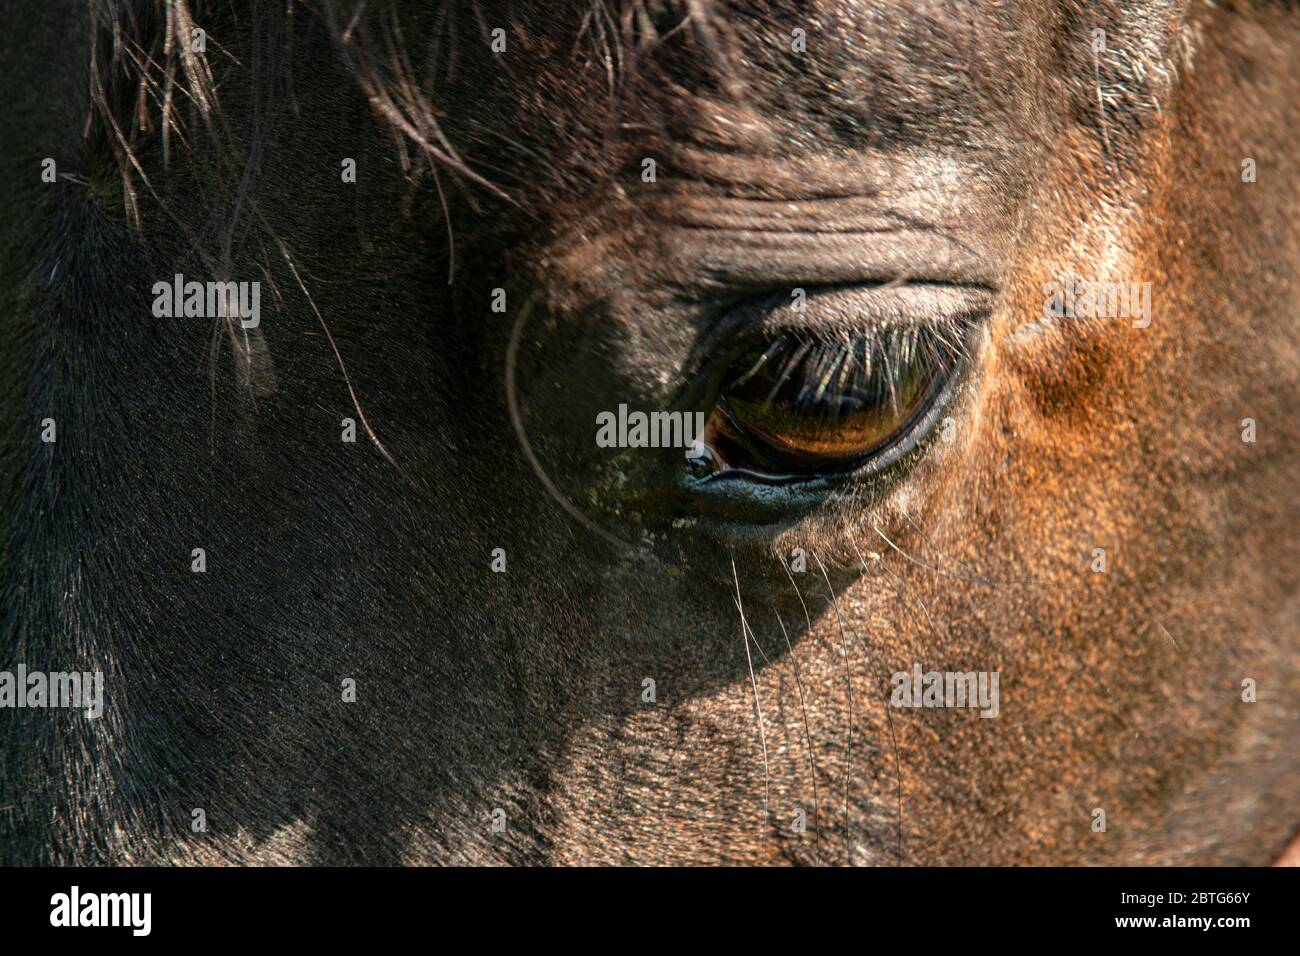 portrait of a eating horse Stock Photo